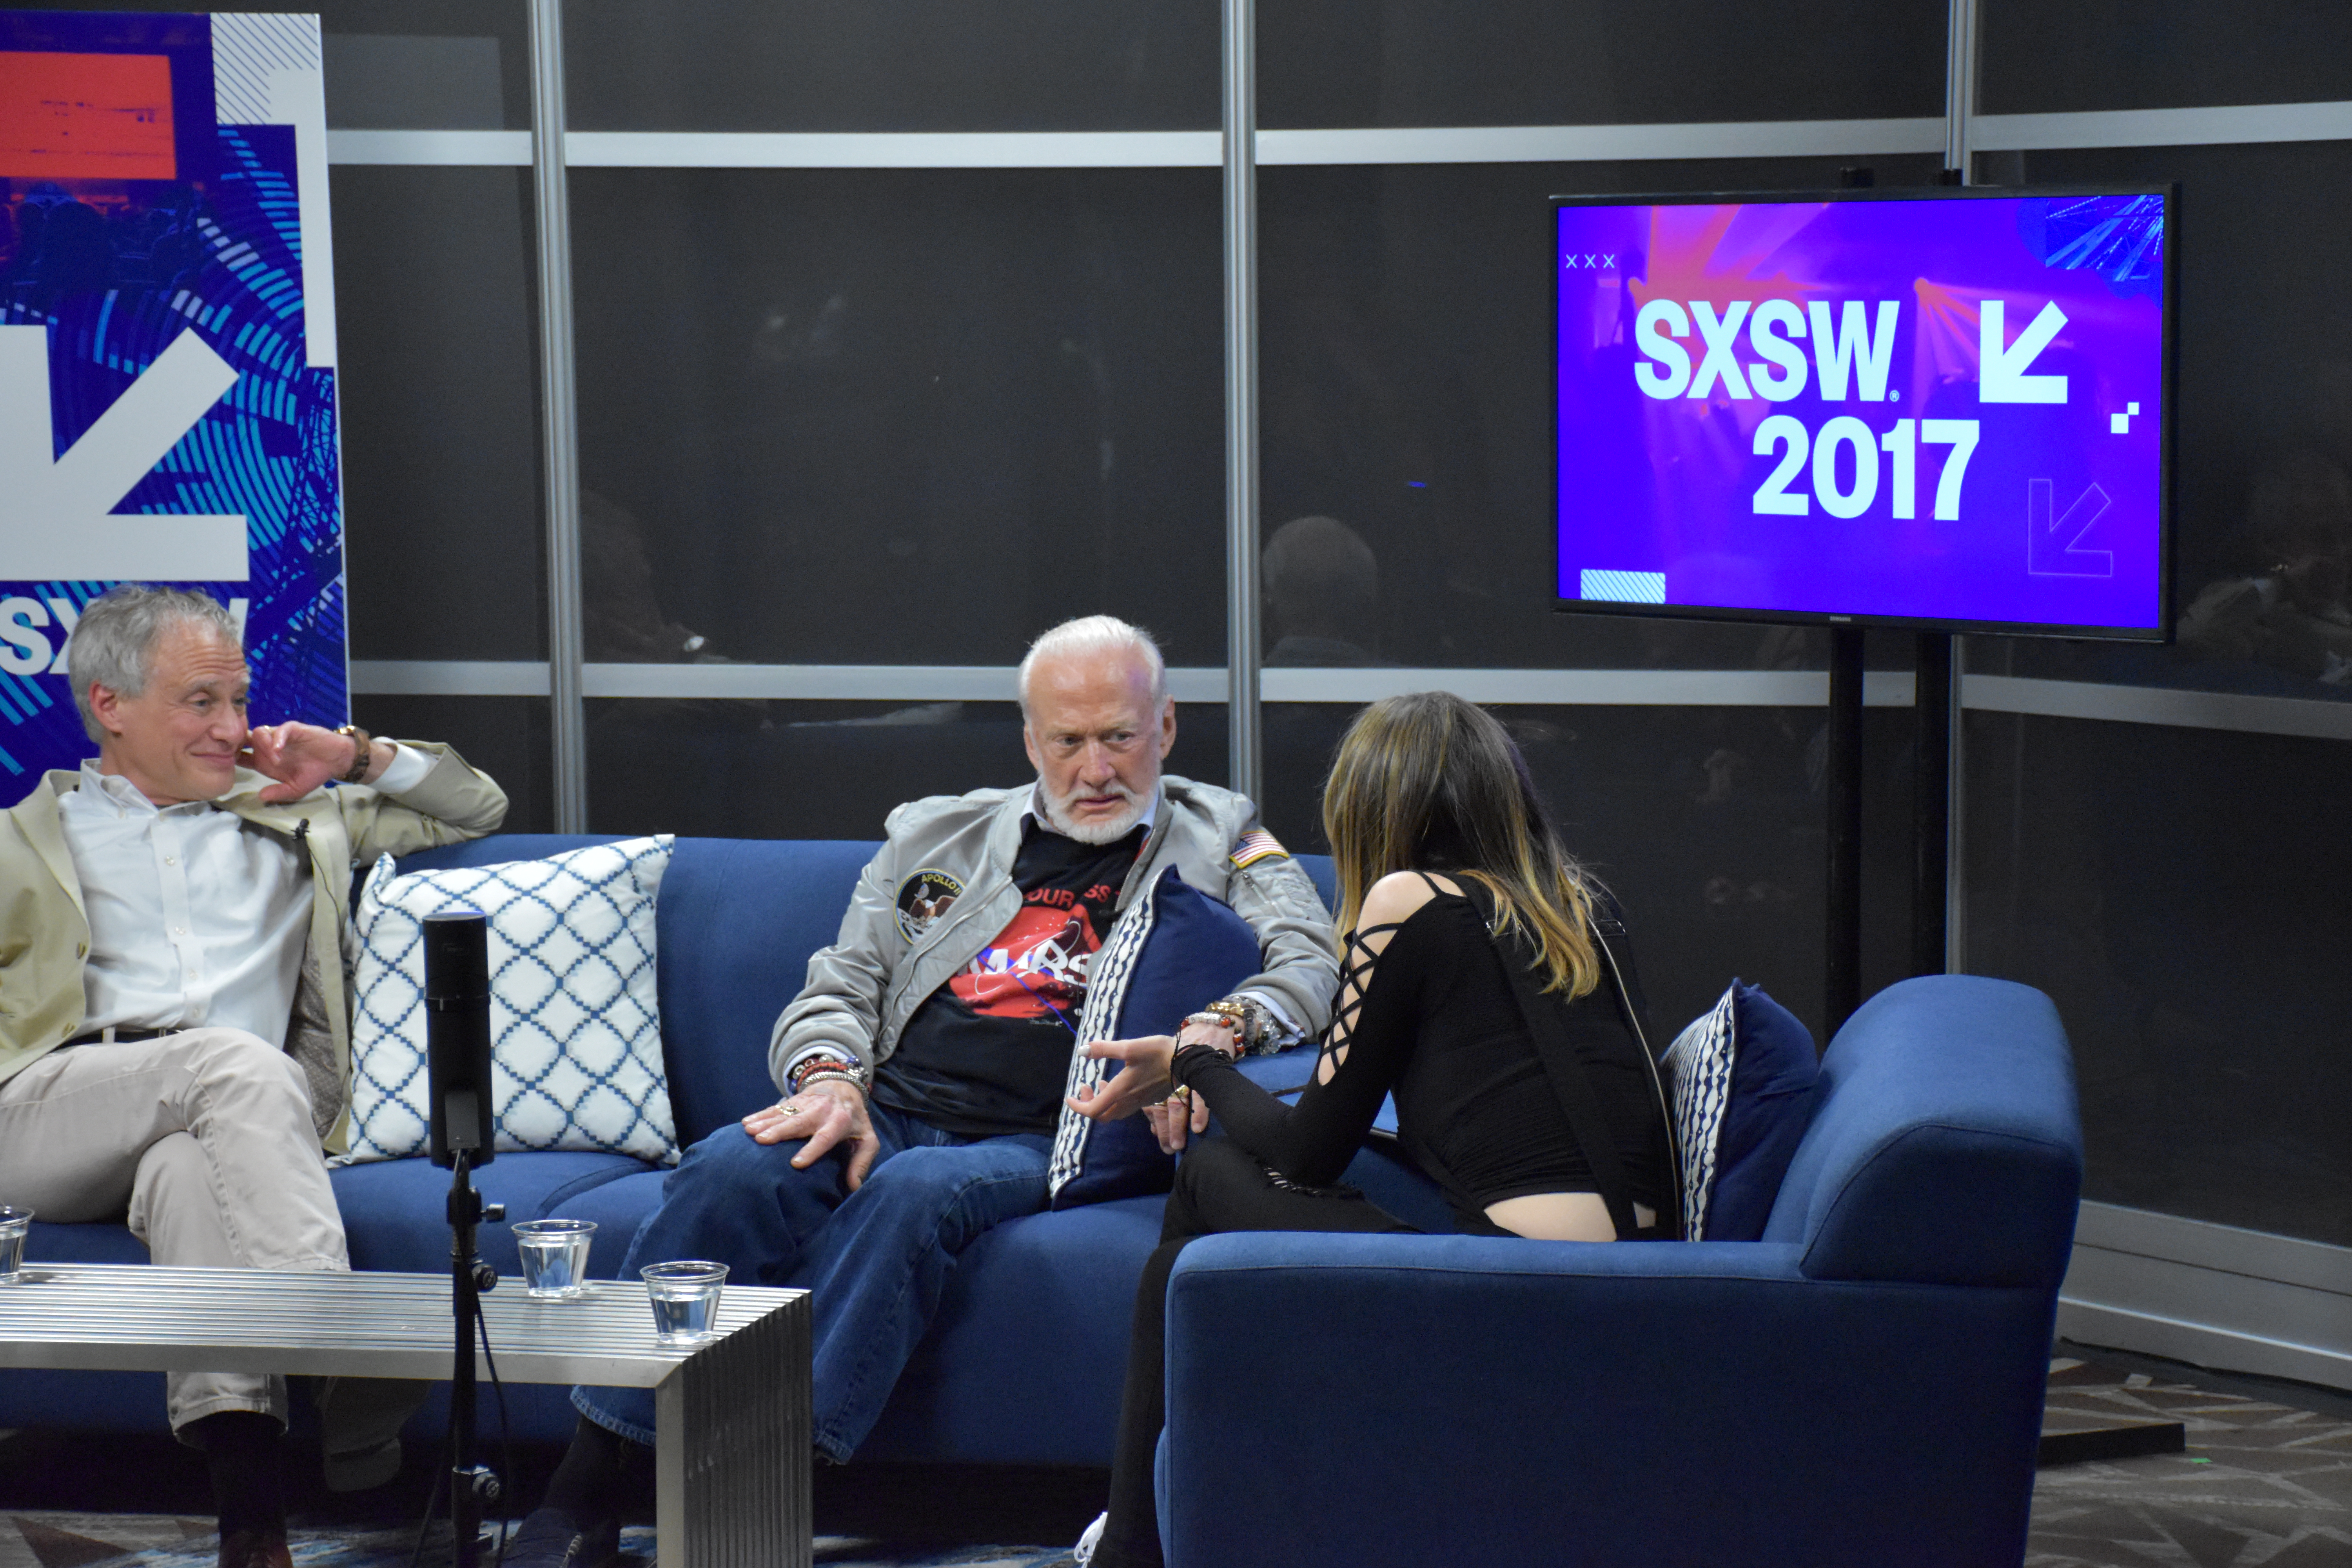 Buzz Aldrin pushes for Mars exploration during SXSW talk